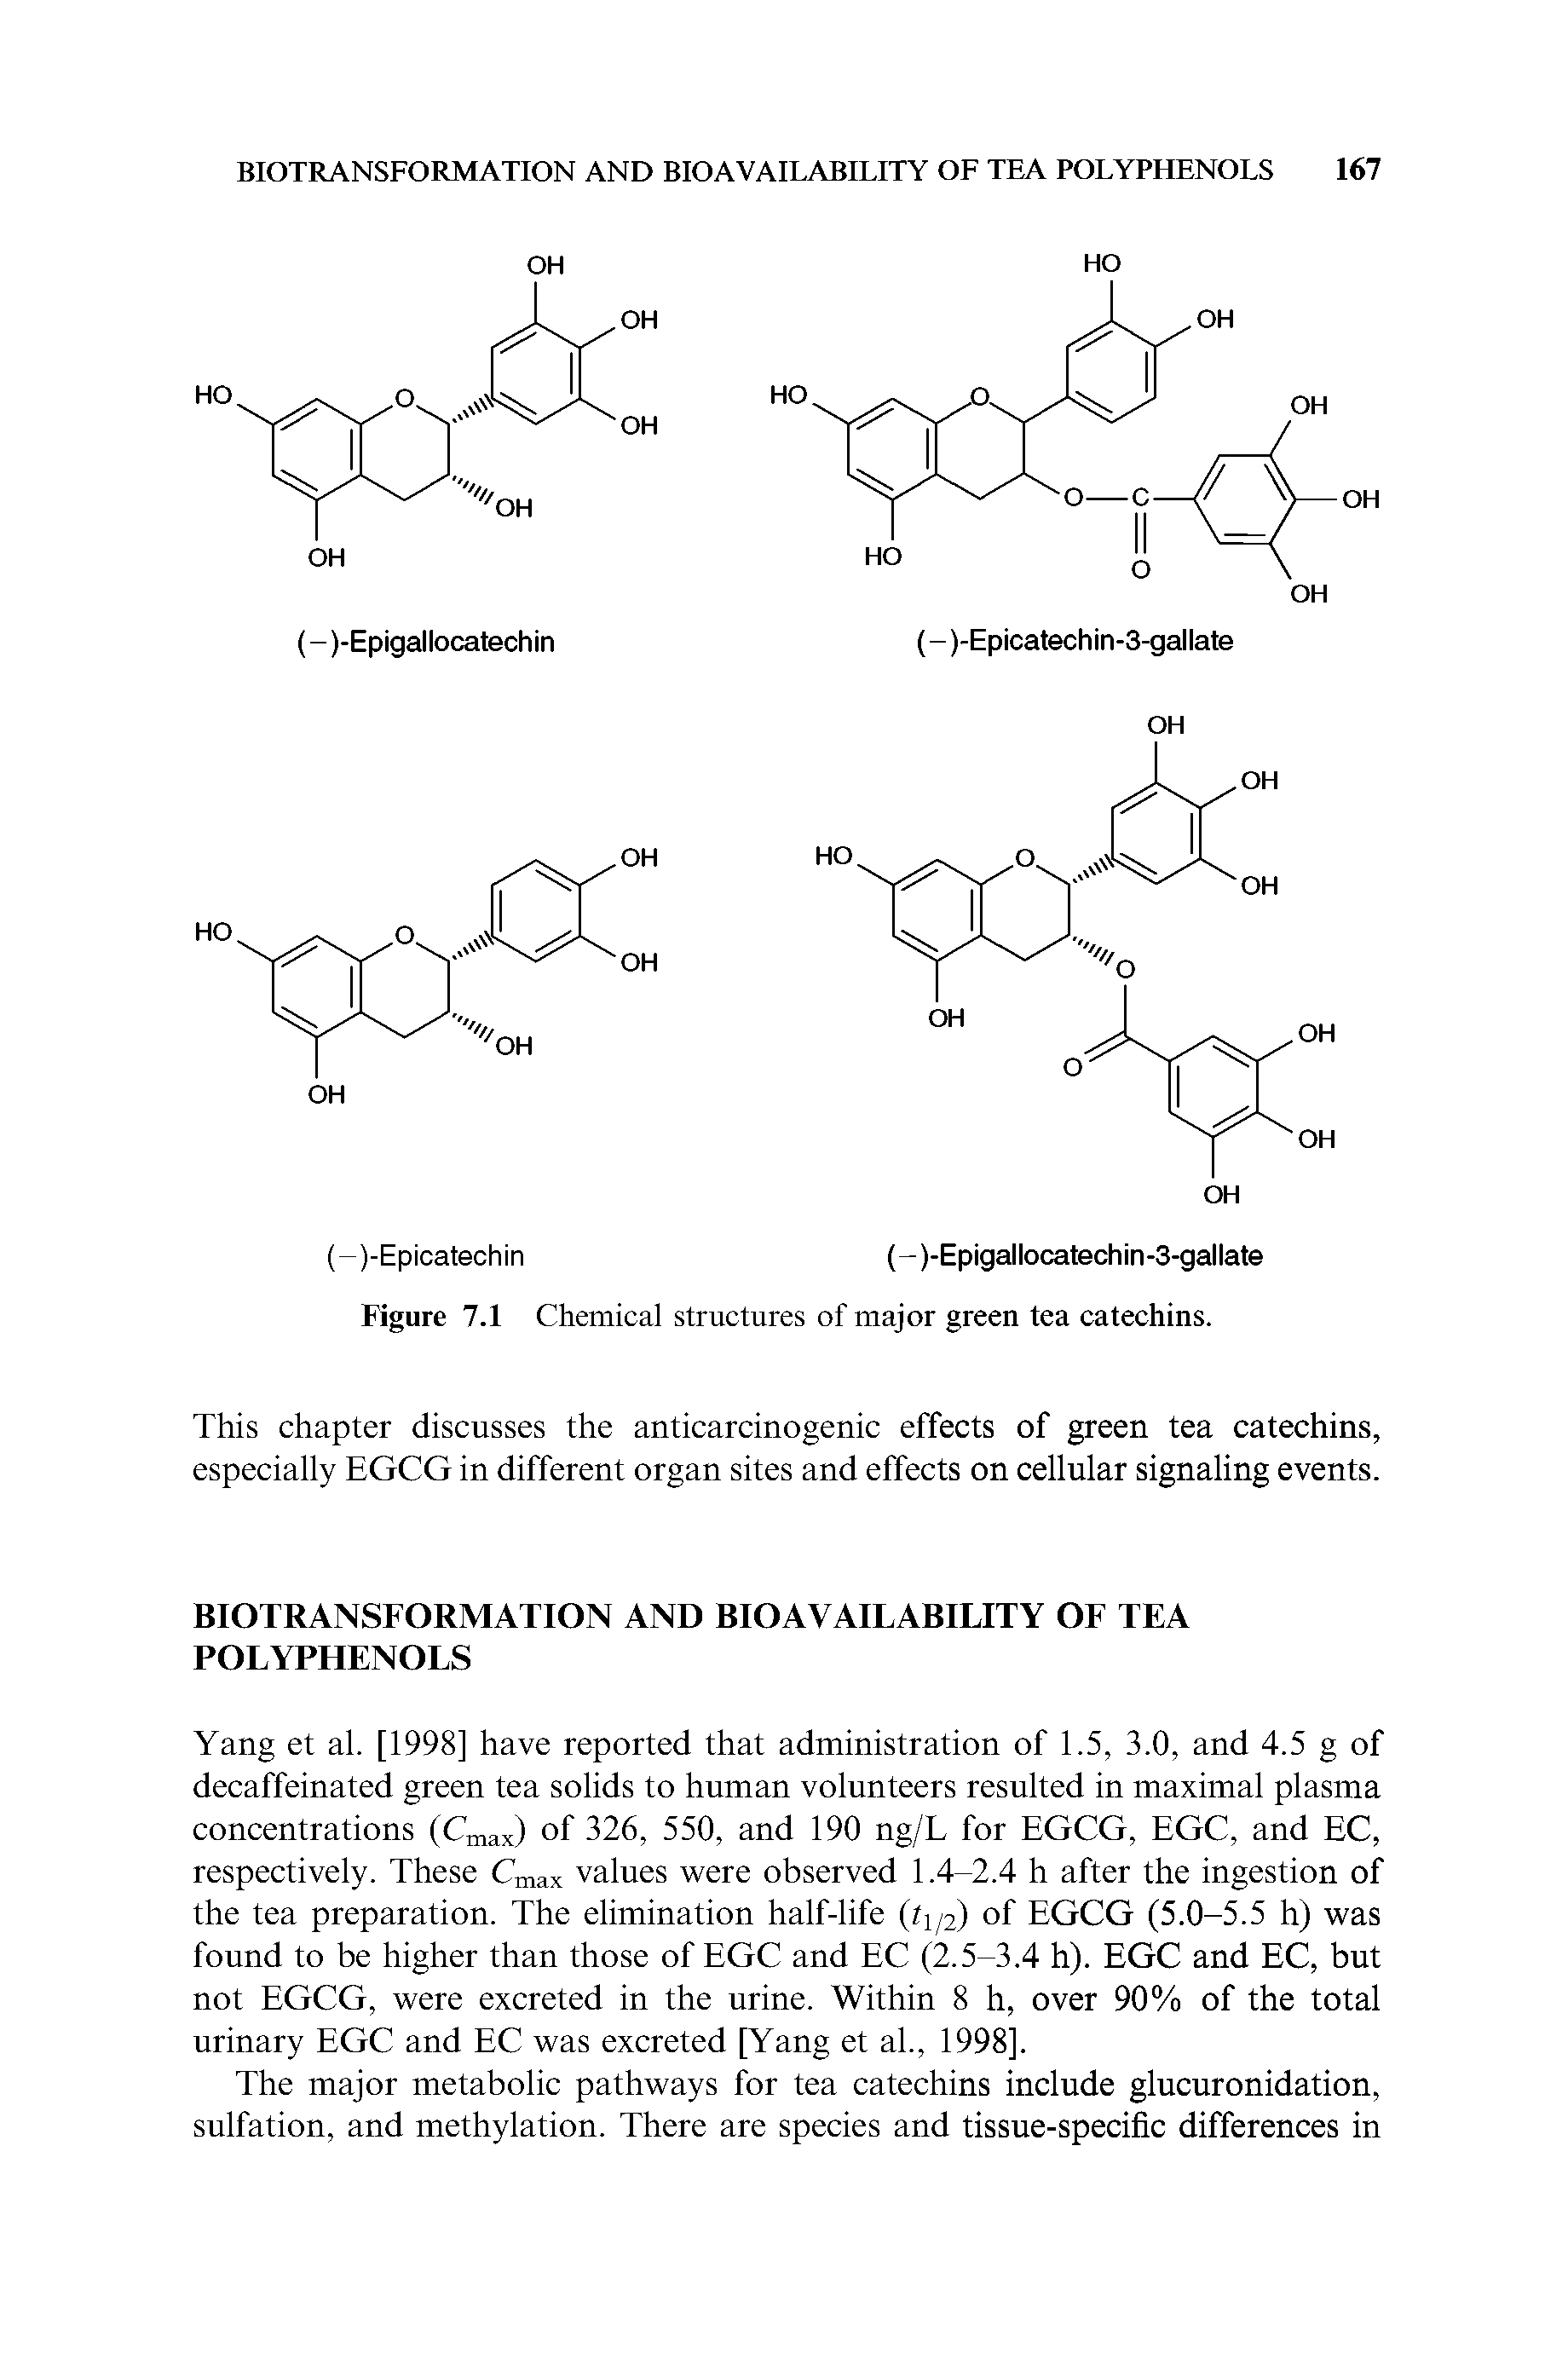 Figure 7.1 Chemical structures of major green tea catechins.